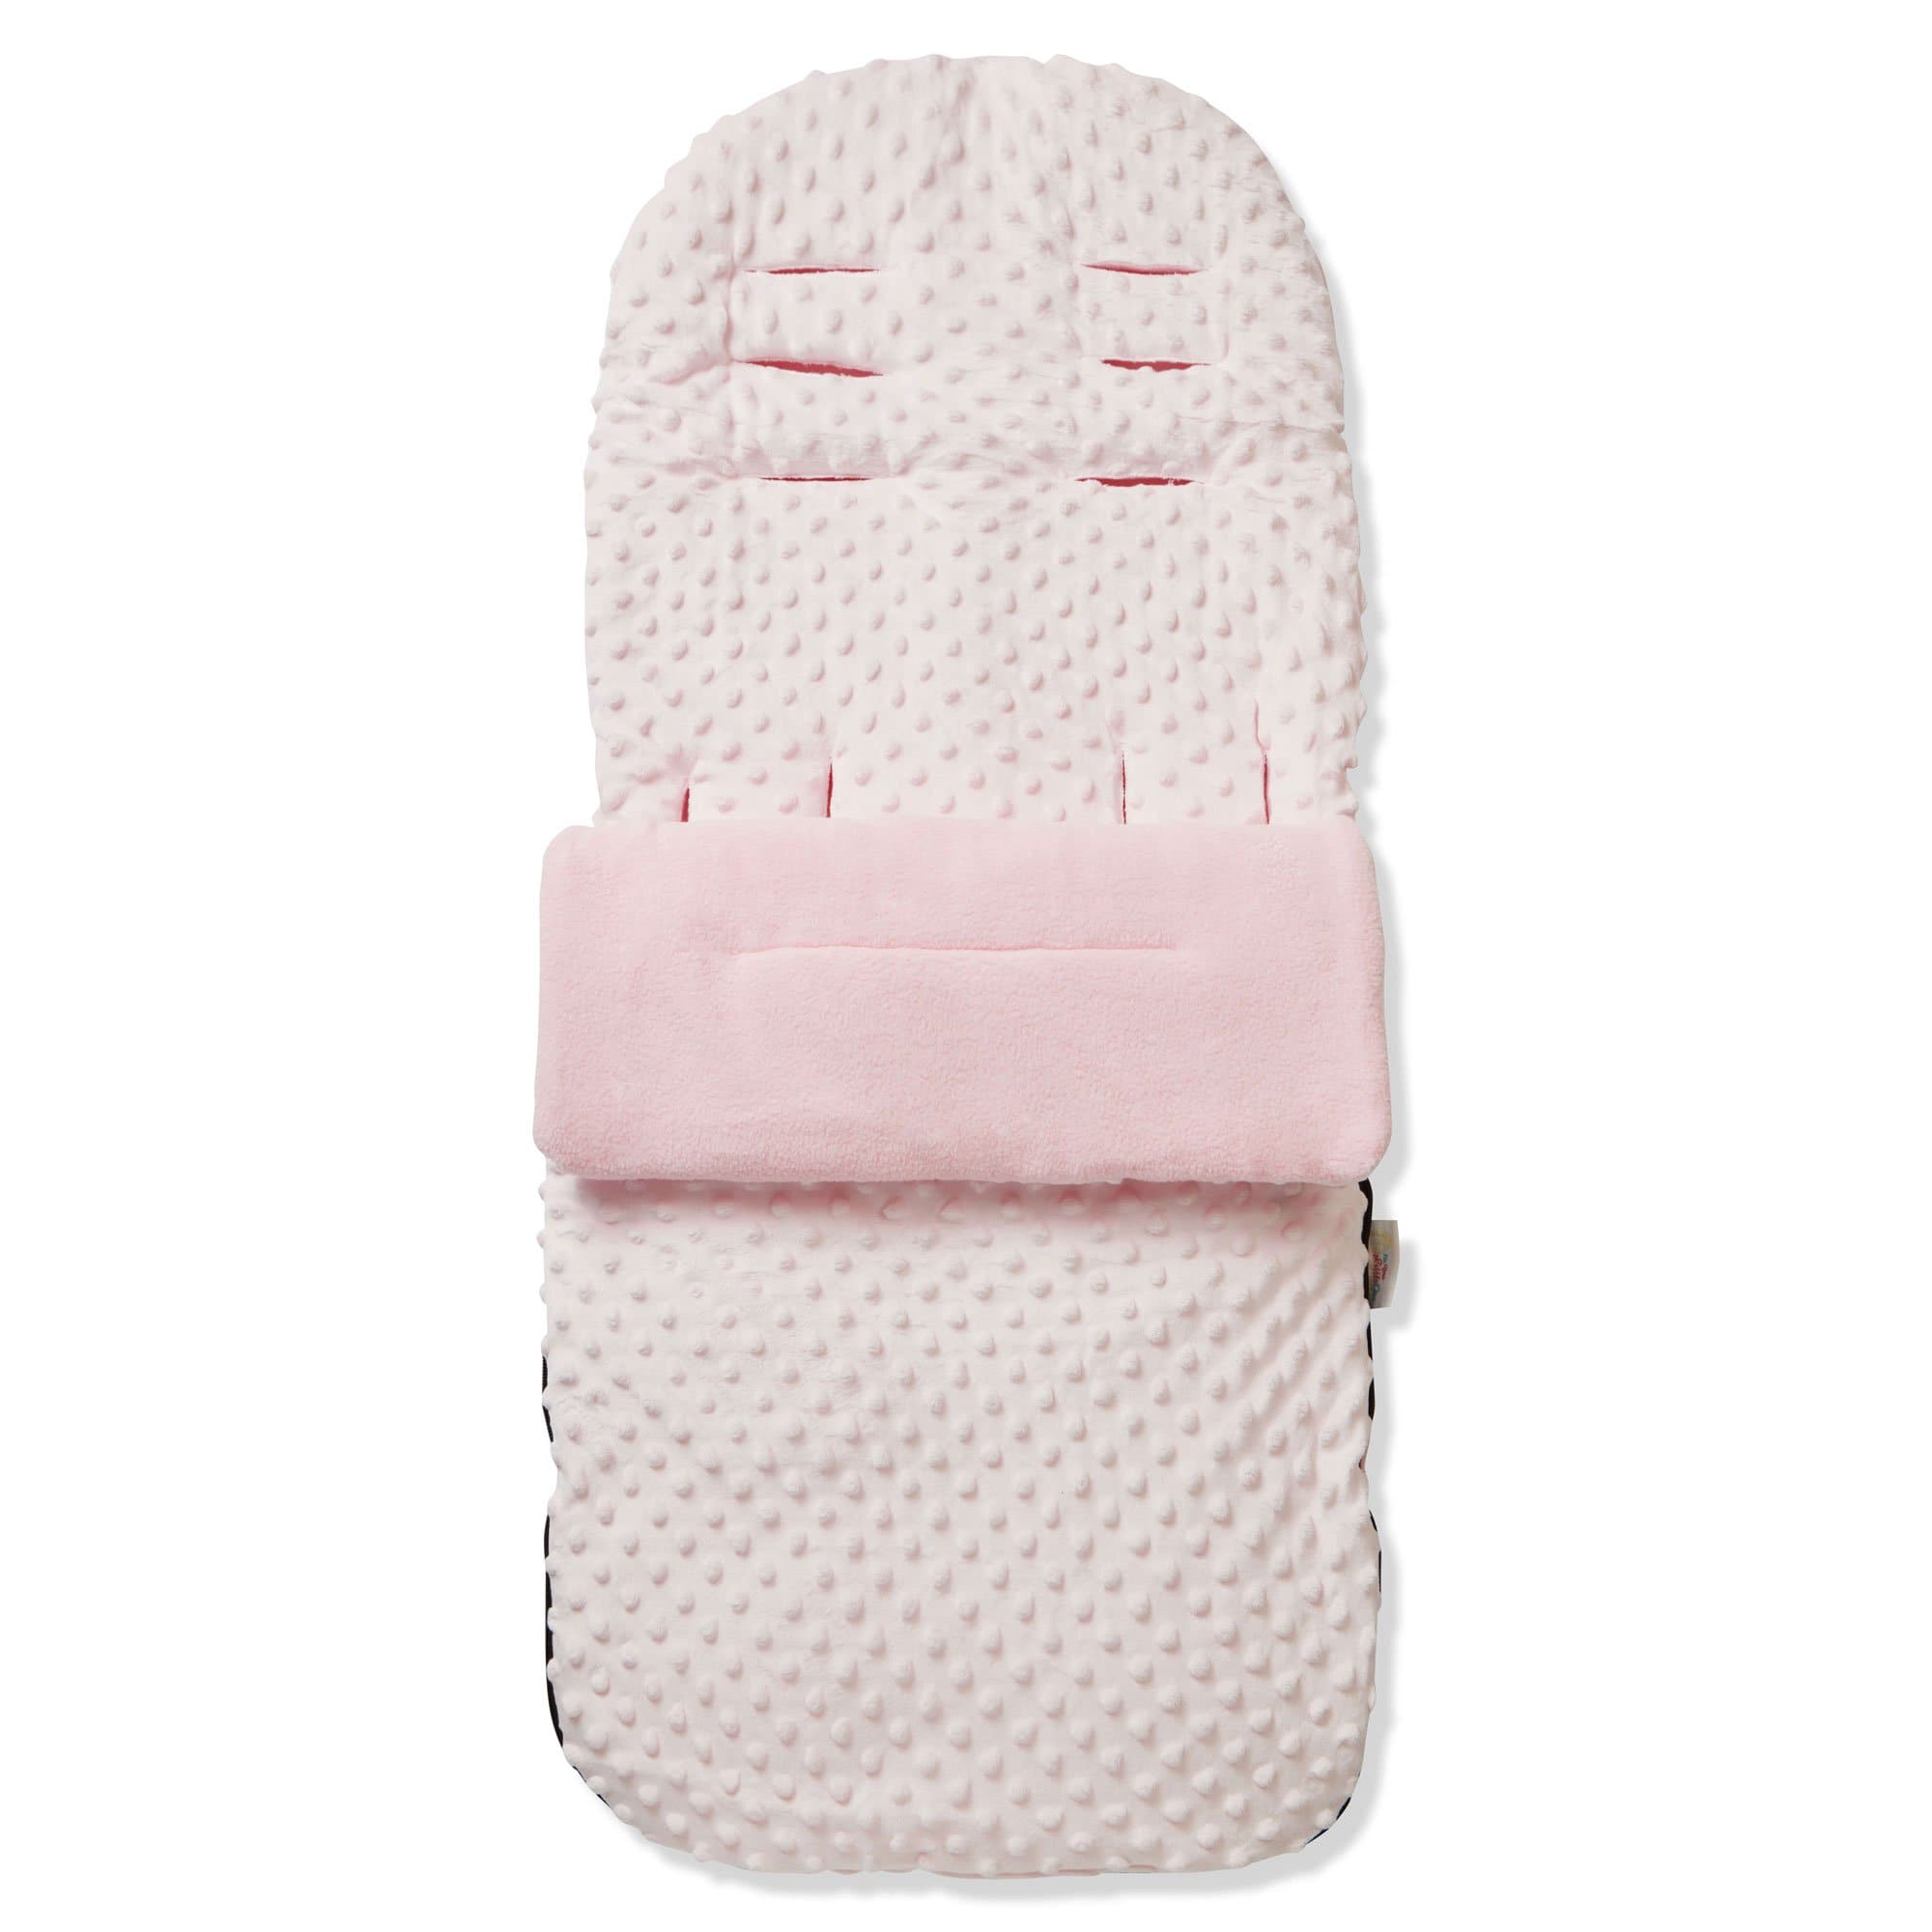 Dimple Footmuff / Cosy Toes Compatible with Hesba - Pink / Fits All Models | For Your Little One